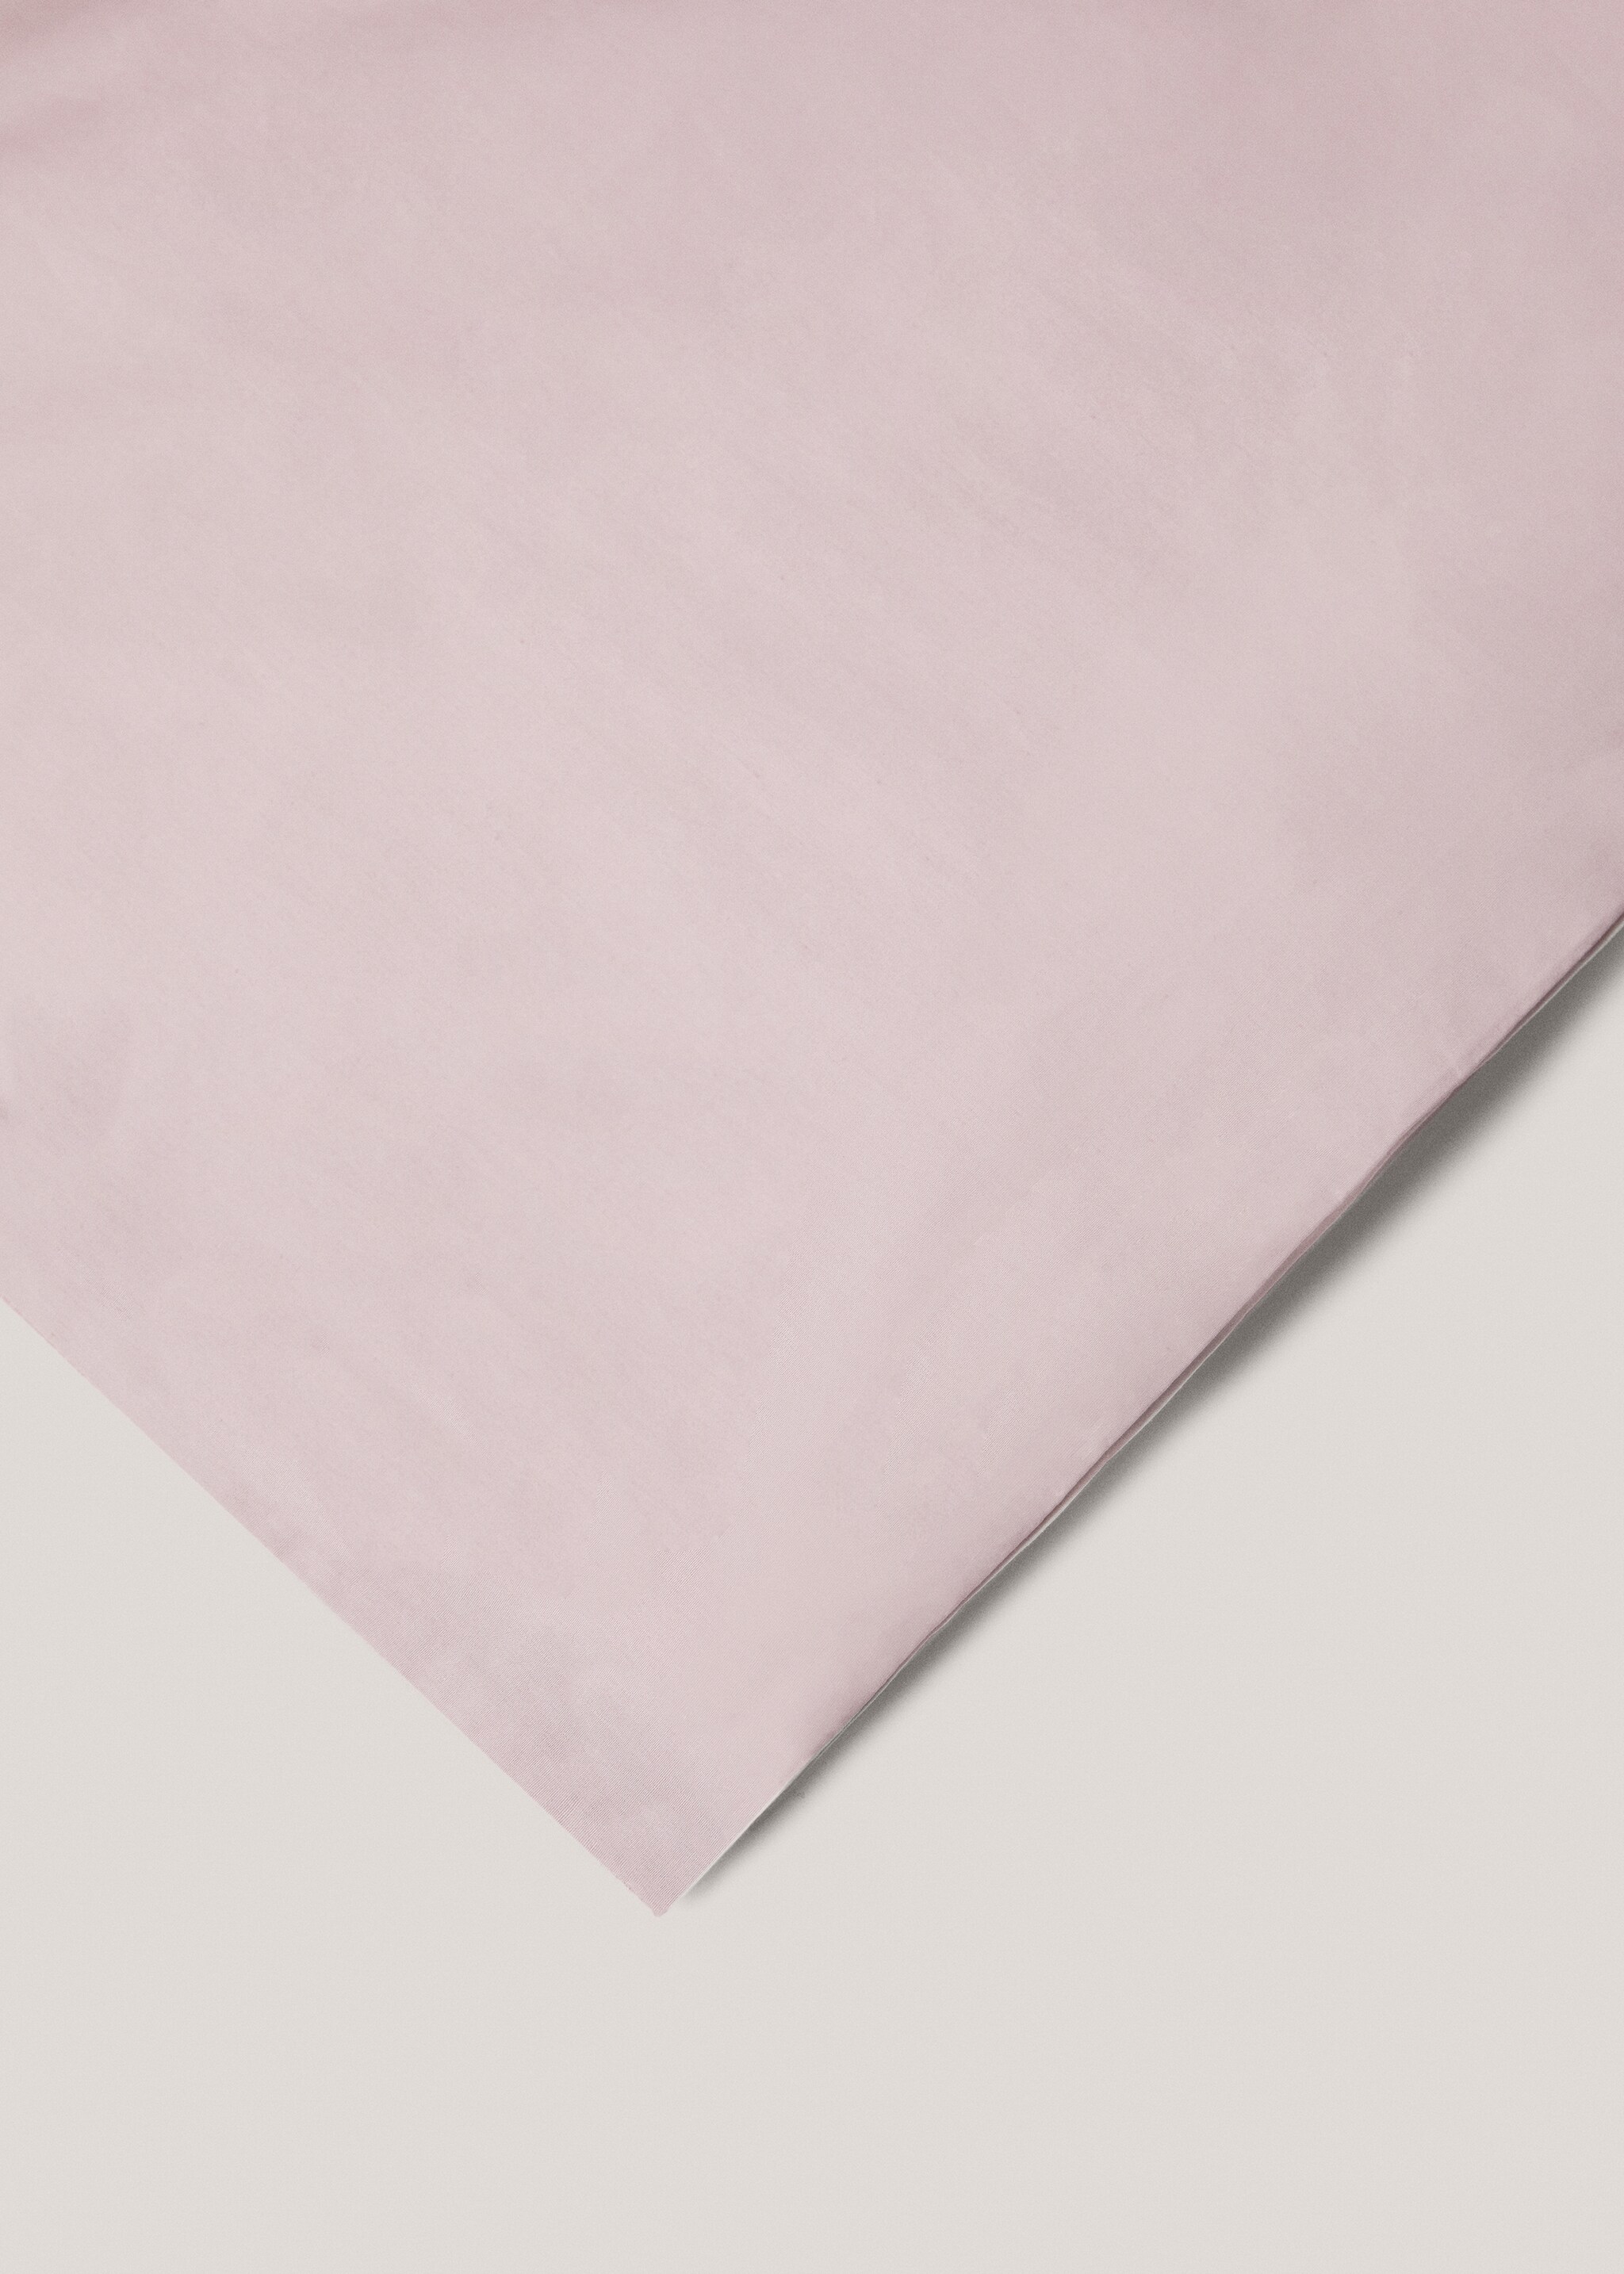 302 thread count cotton duvet cover for King bed - Details of the article 3